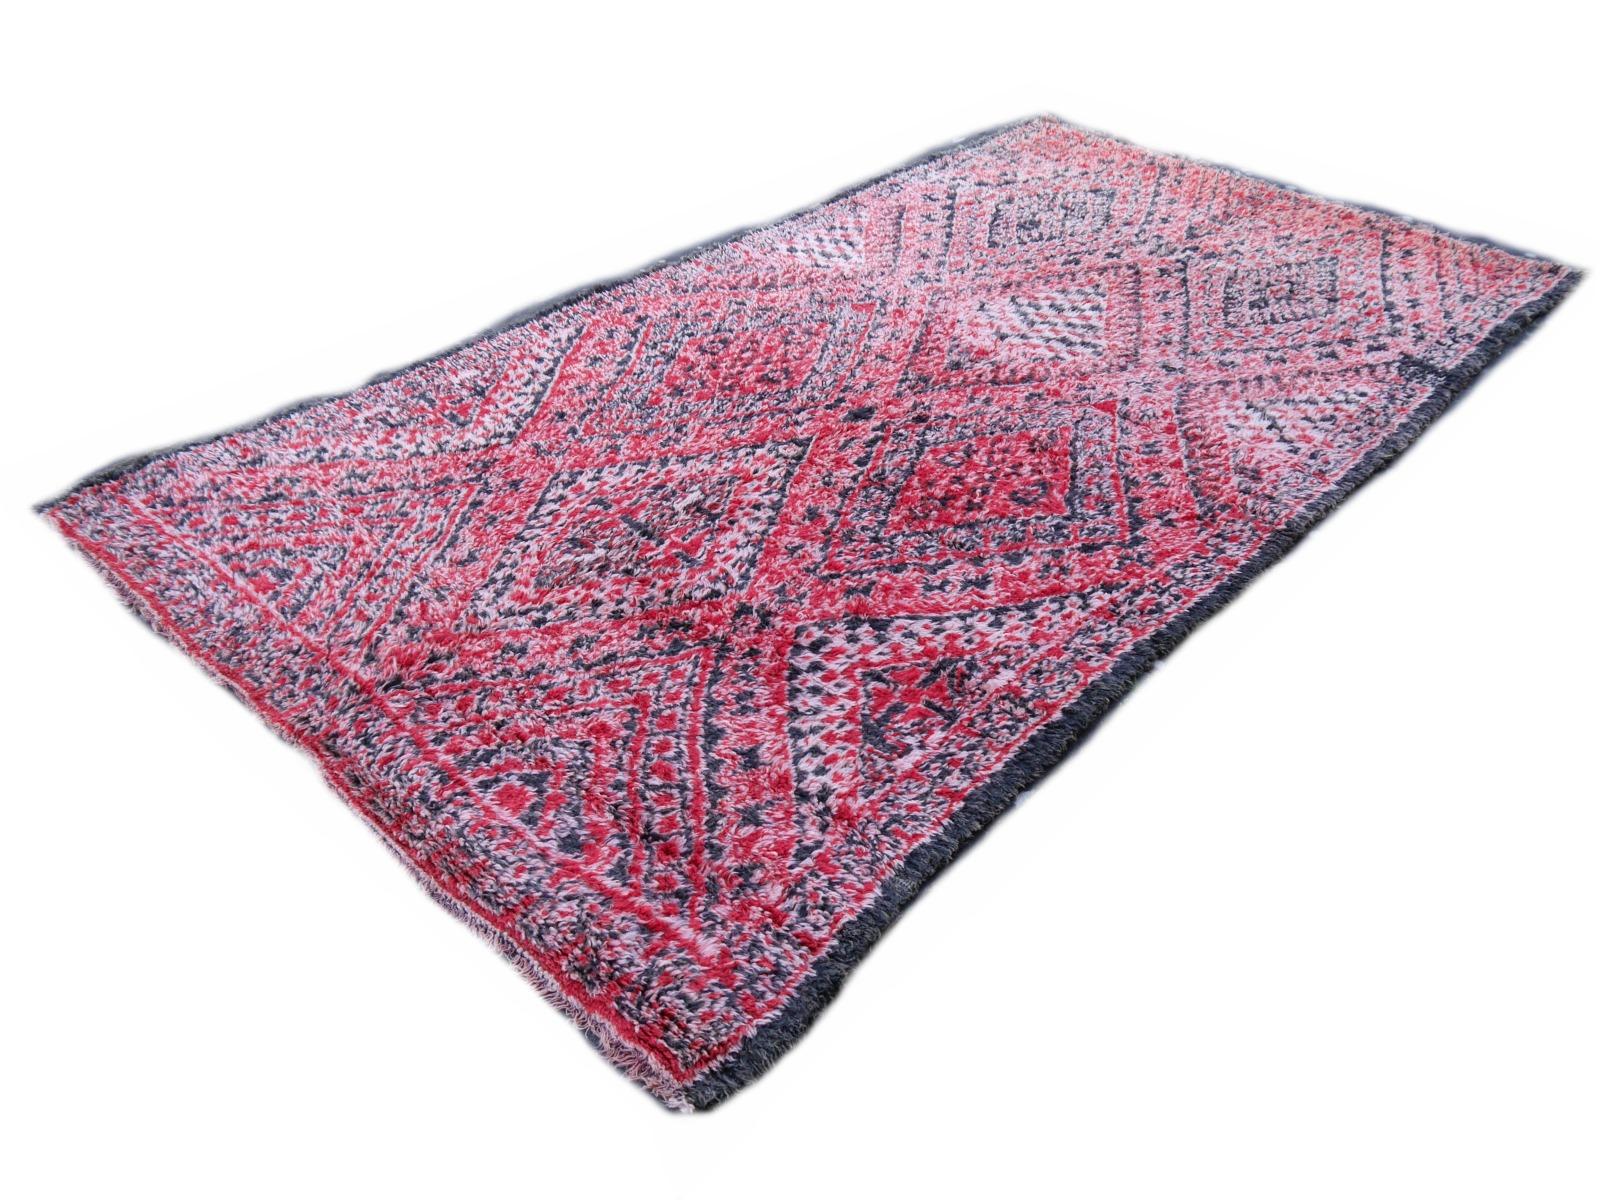 Moroccan Vintage Rug North African Diamond Design Wool Red Pink Charcoal White For Sale 3